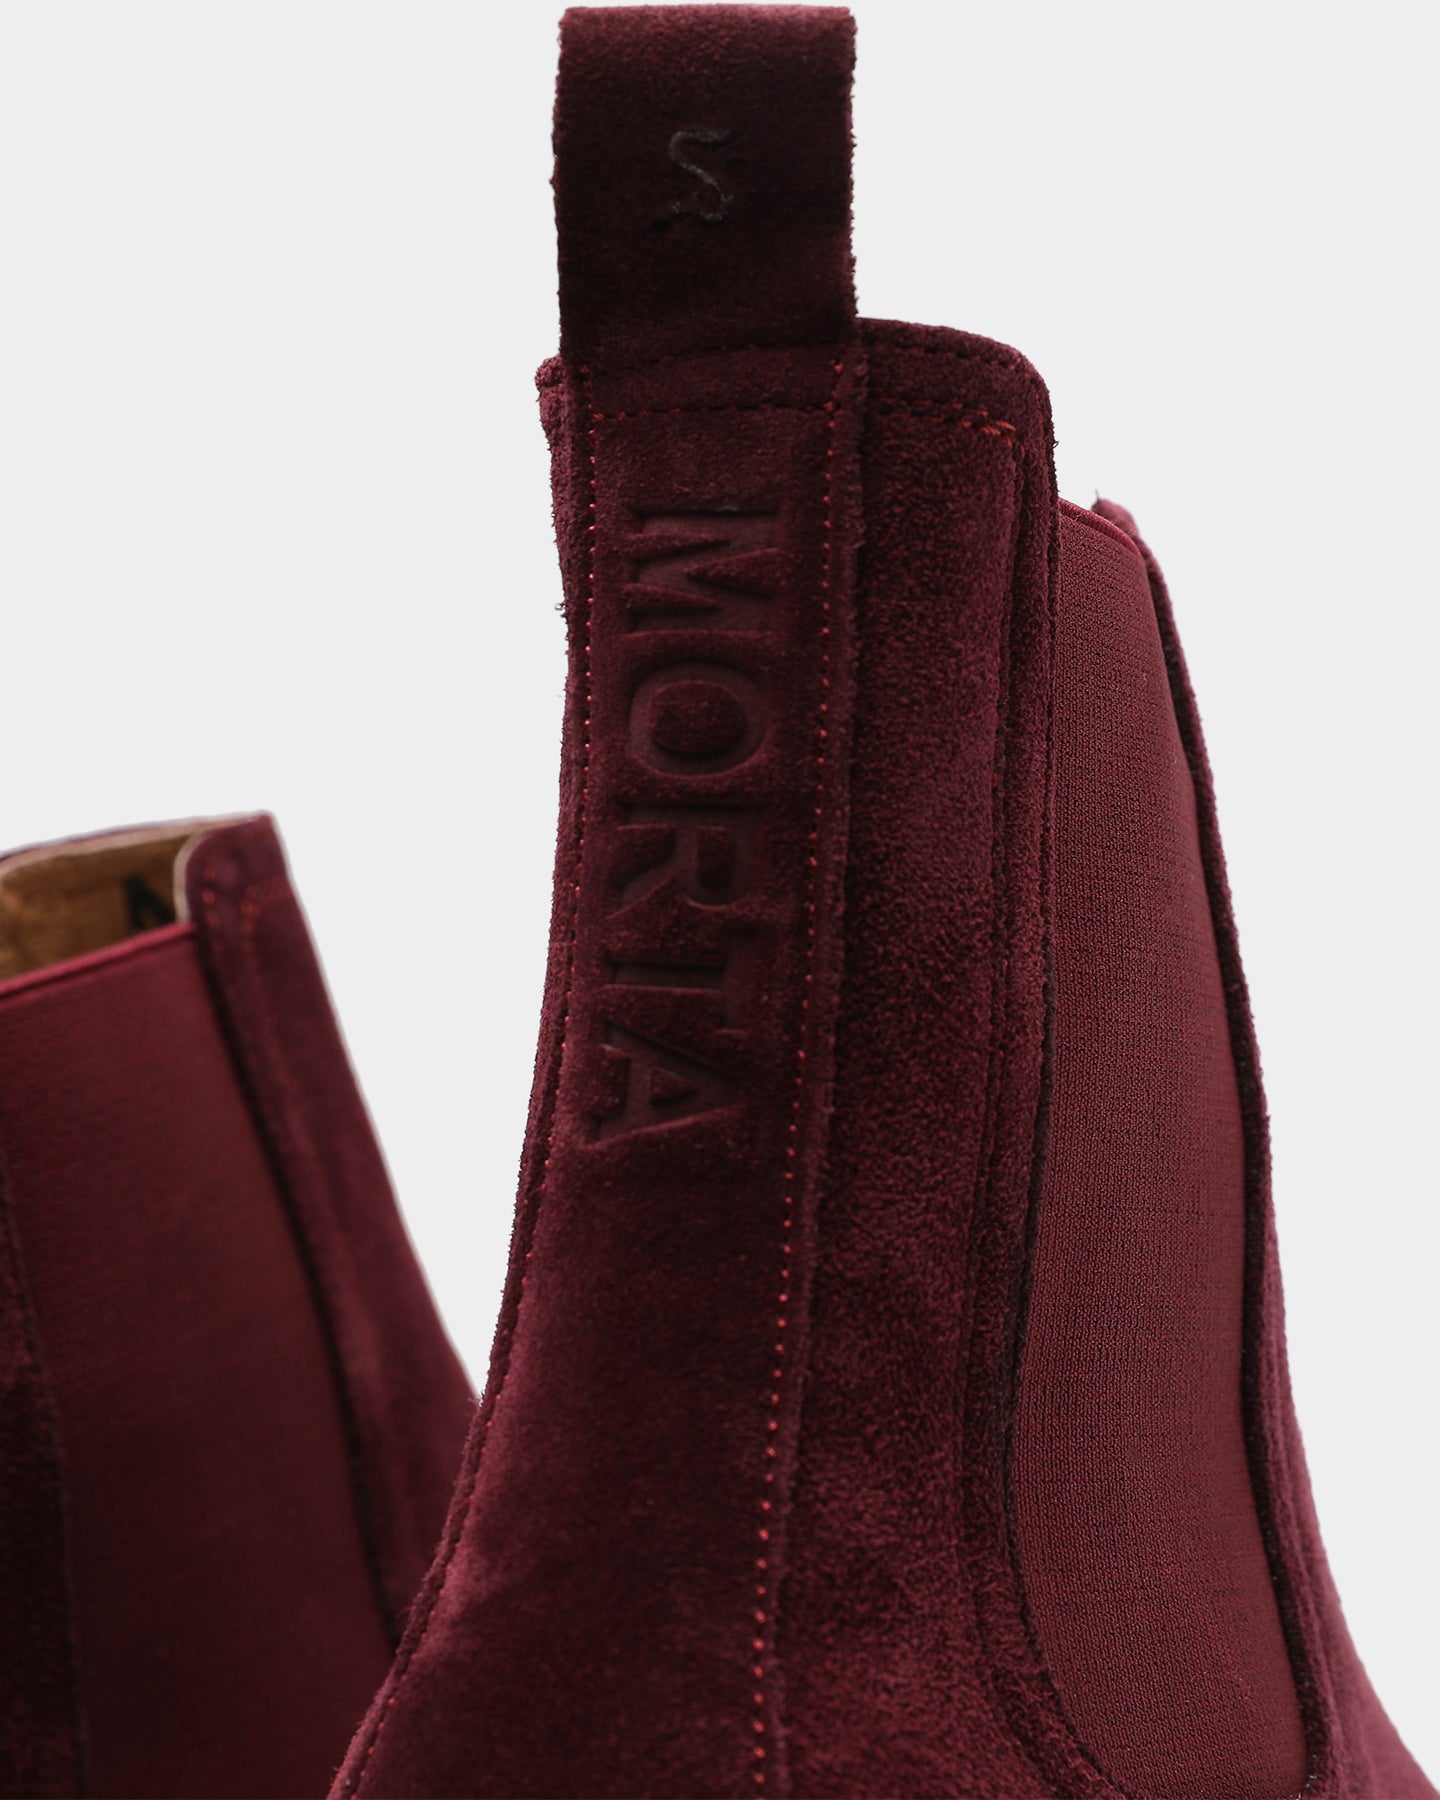 nomad chelsea boot